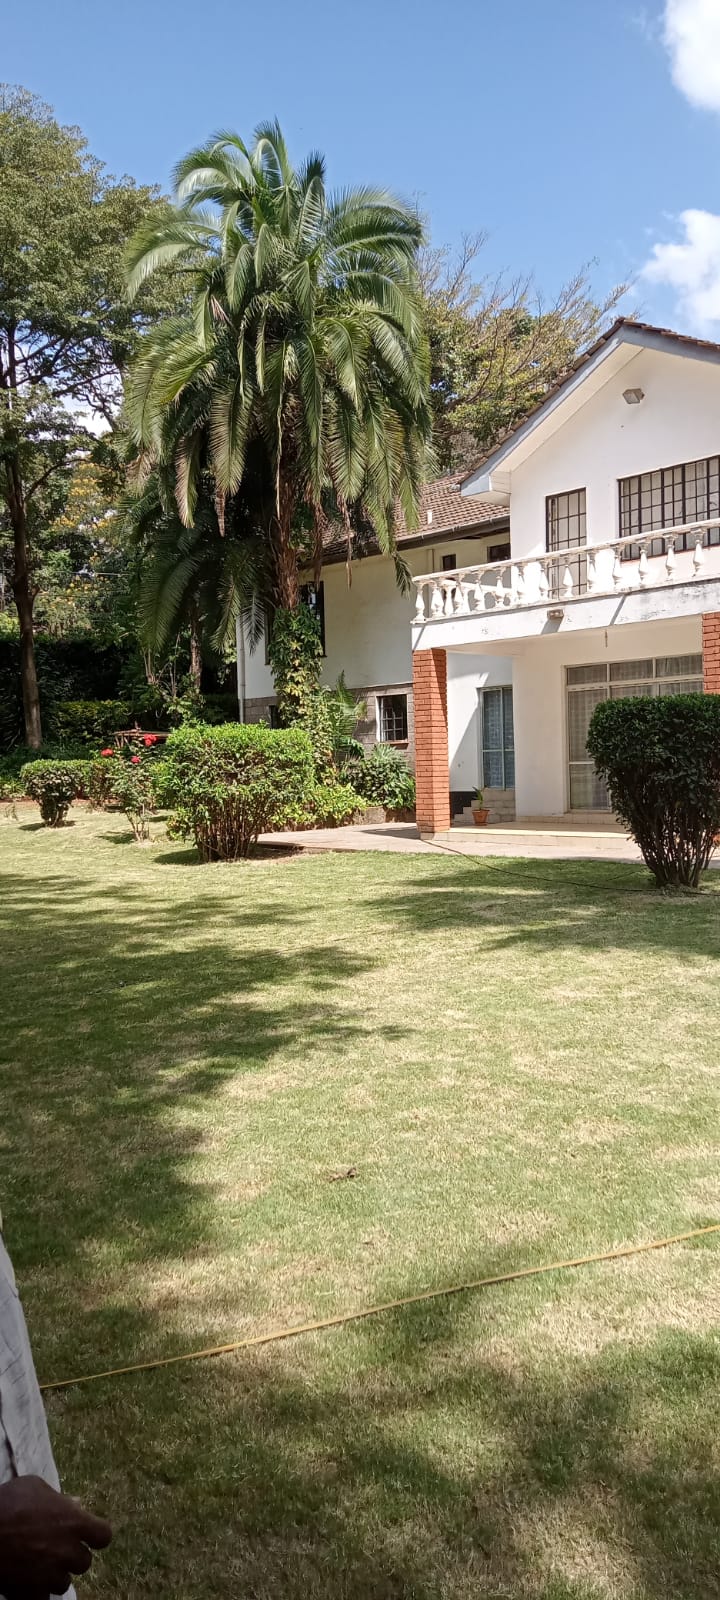 4 Bedroom Double Storey House to Let at Ksh600k Sitting on 34acres with Huge Family Room, Tv Room, Study Room, Terrace, Mature and Well-Kept Garden and more amenities (19)